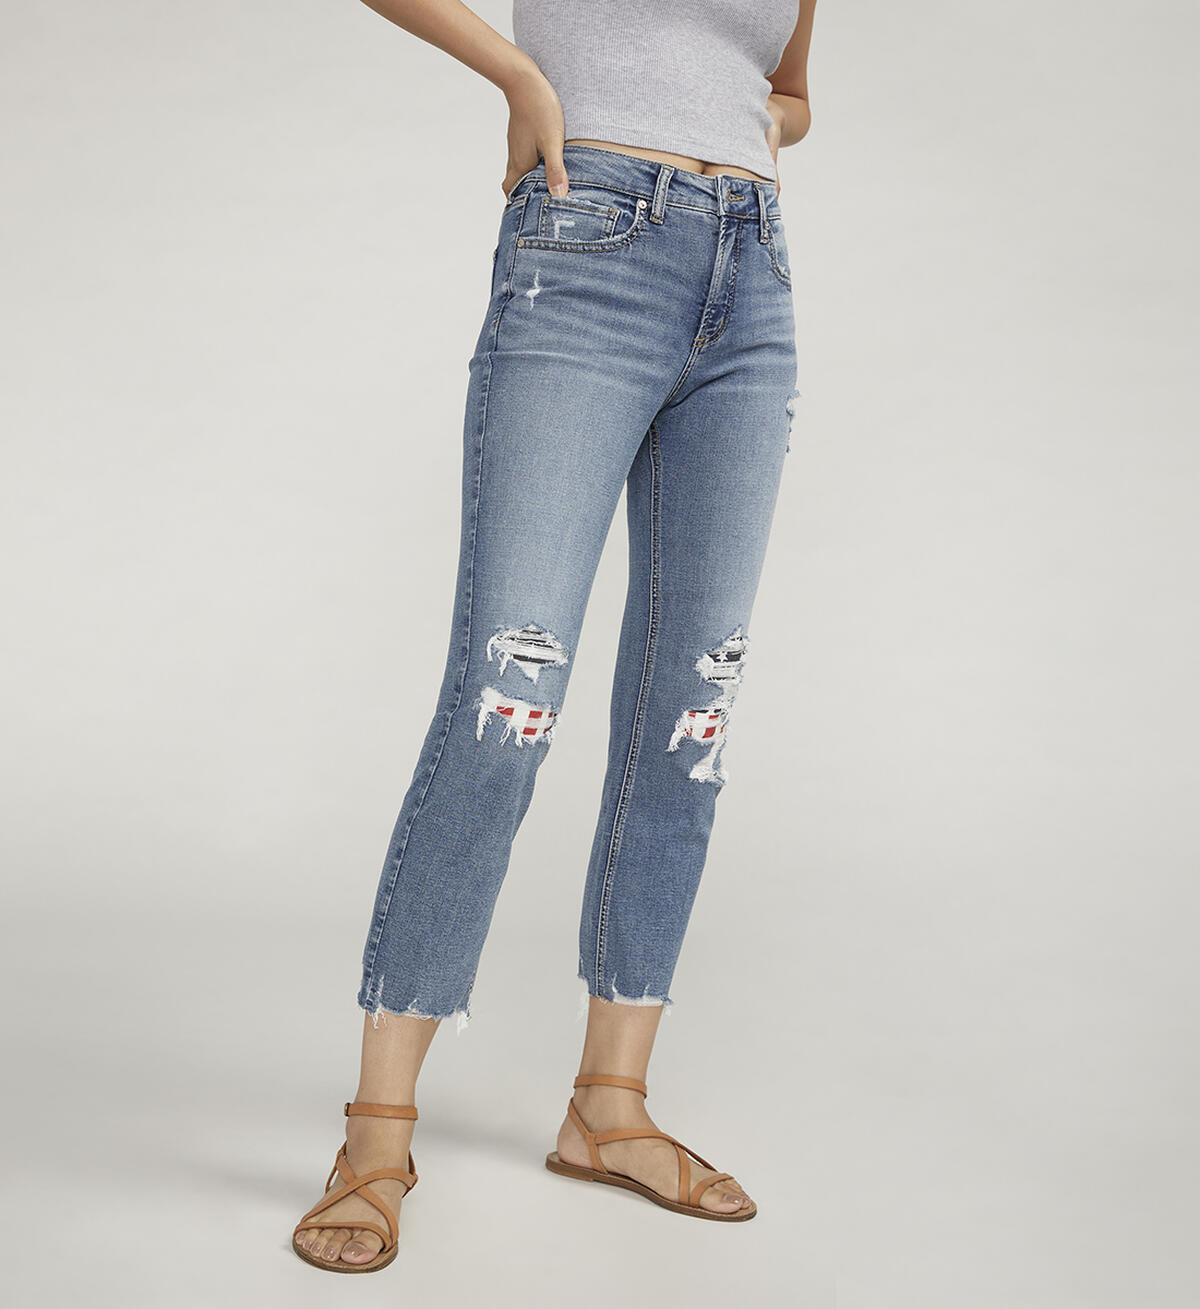 Most Wanted Mid Rise Straight Leg Americana Jeans, , hi-res image number 3